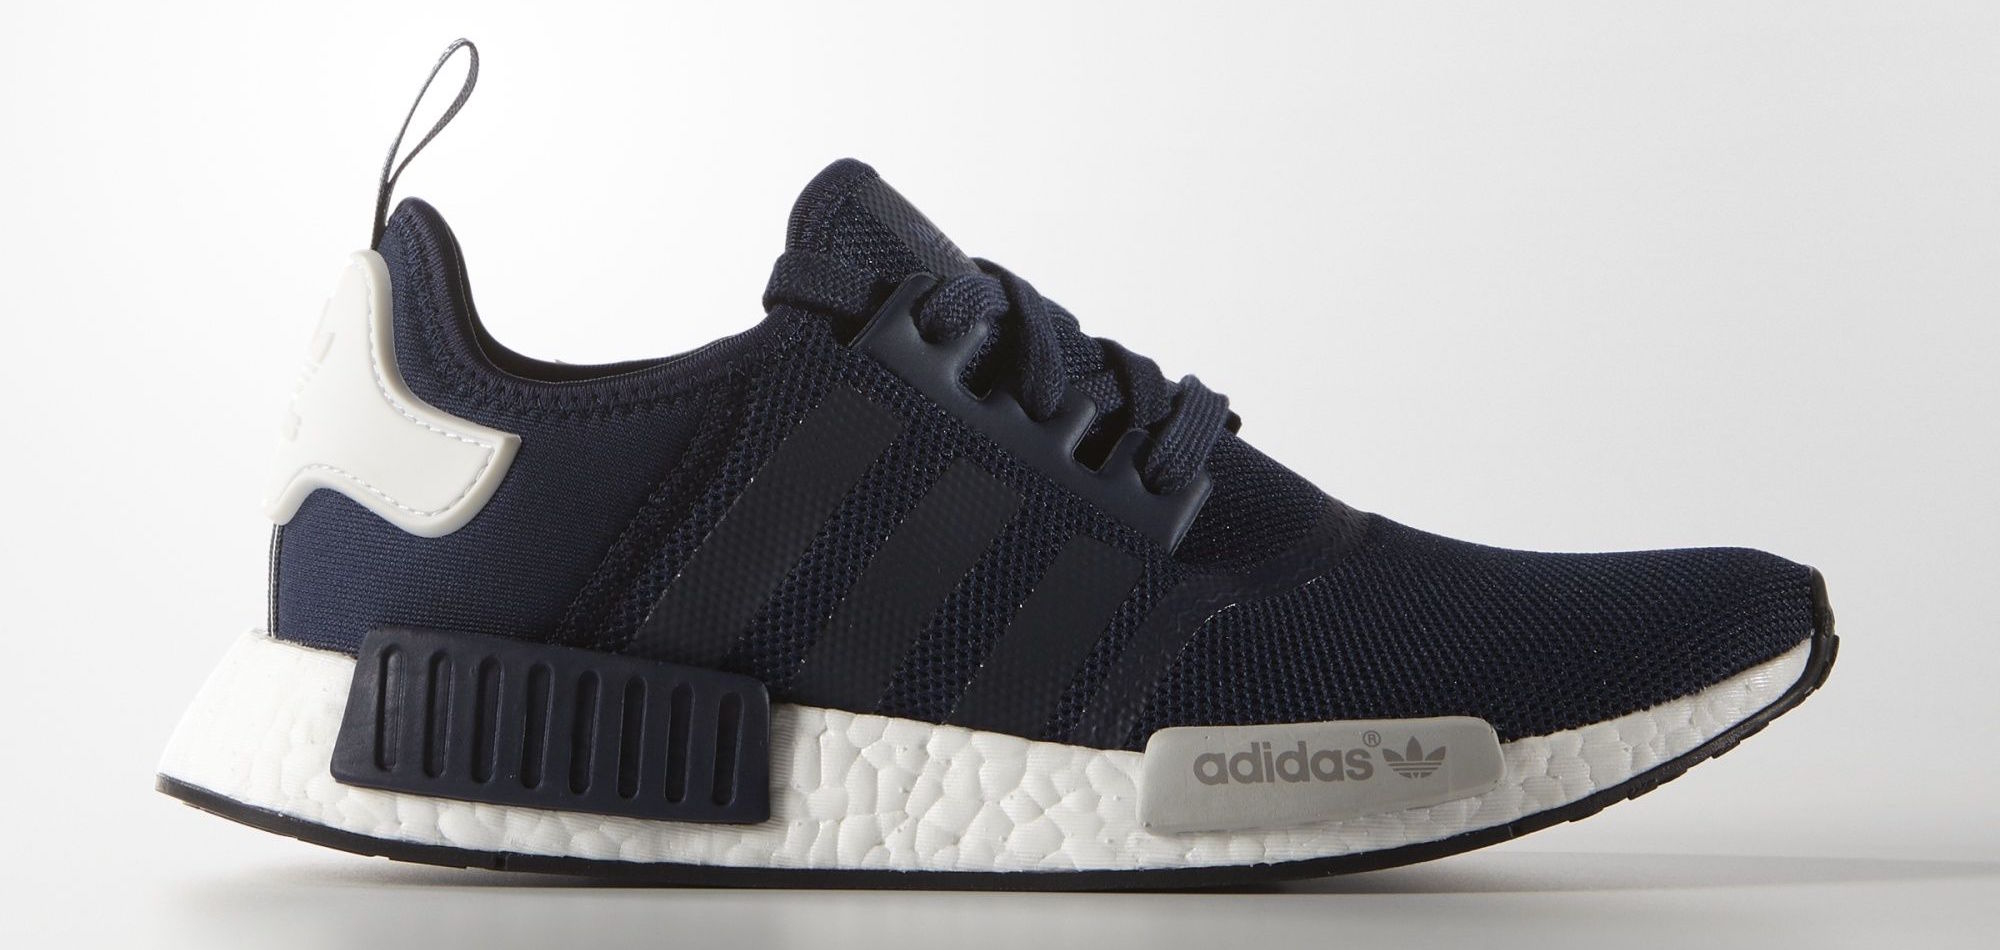 patologisk fisk forholdet The adidas NMD R1 Runner is Available in Multiple Colorways - WearTesters